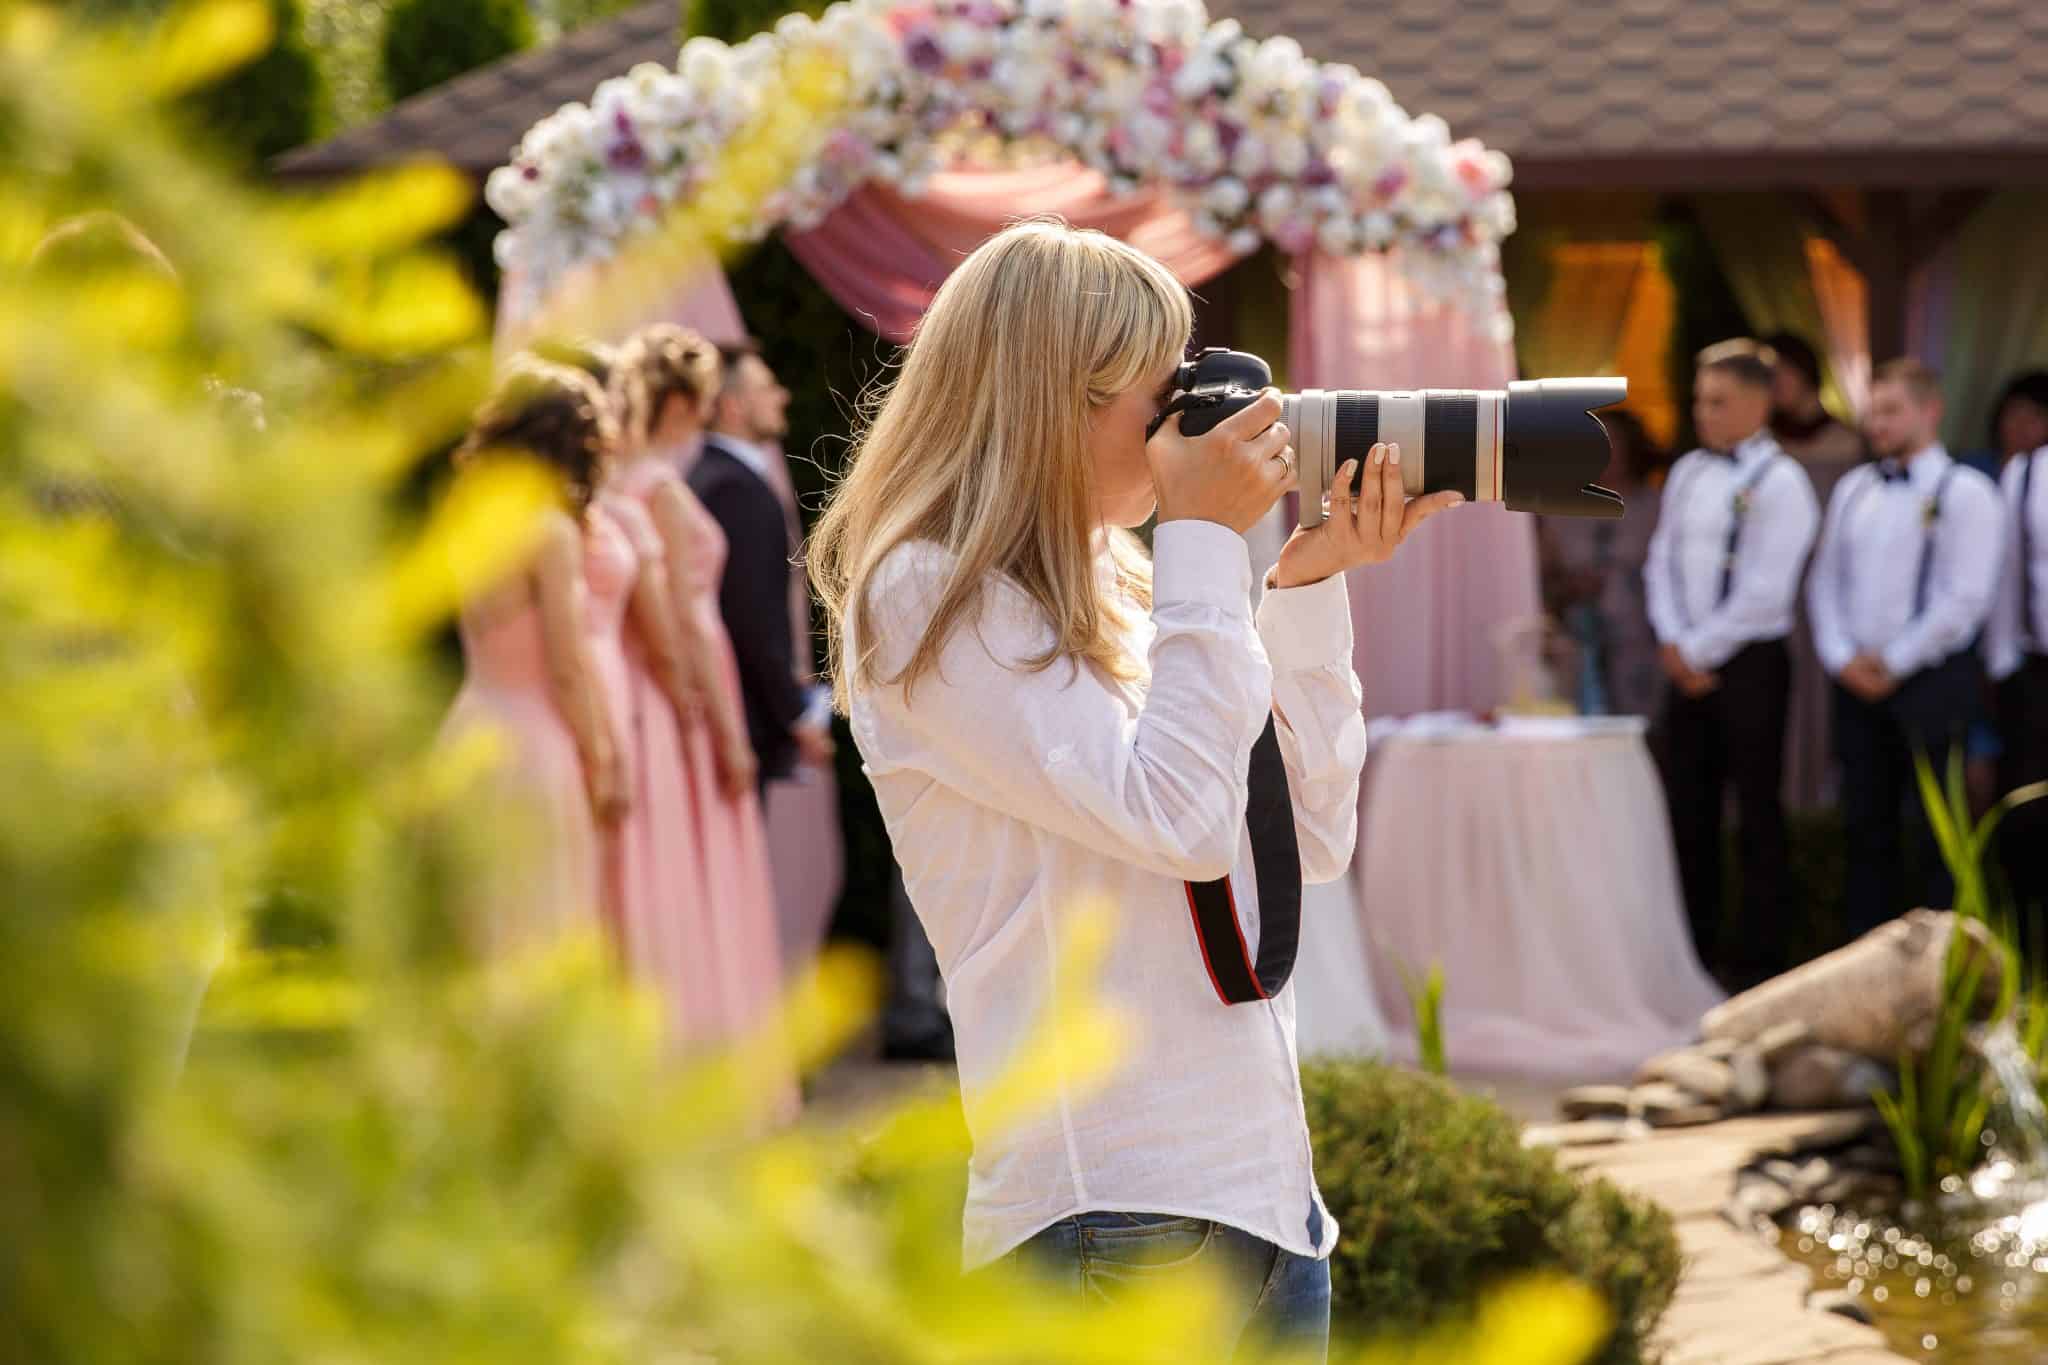 What Should a Photographer Wear to a Wedding?